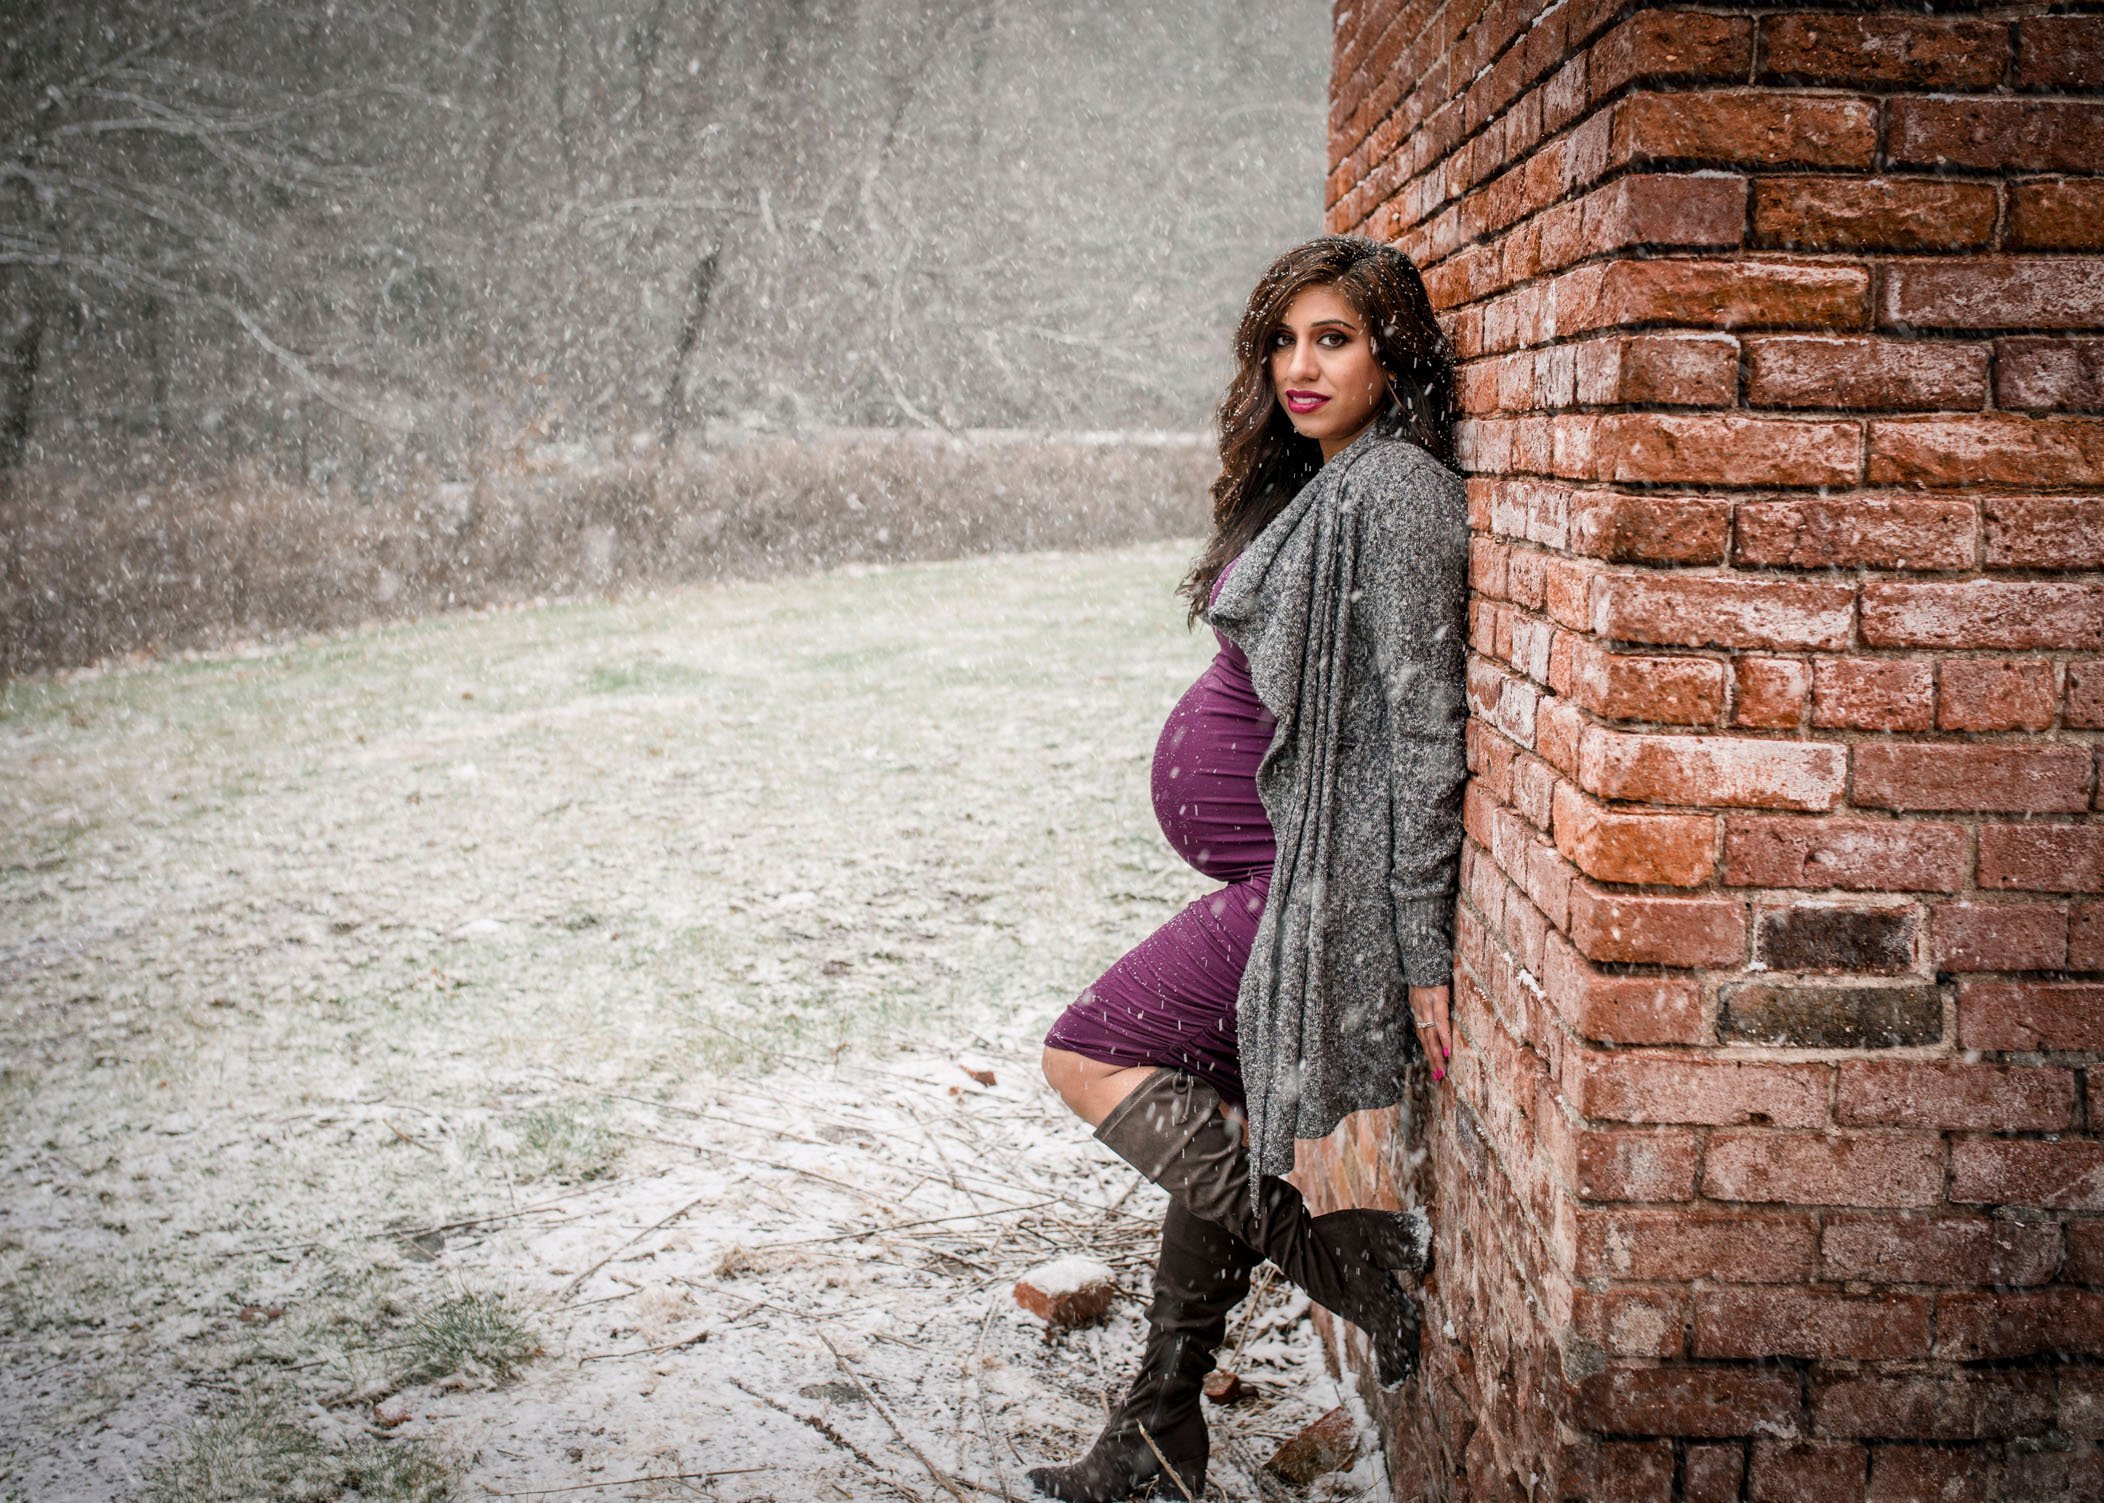 pregnant Indian woman leaning against brick wall outside in the snow